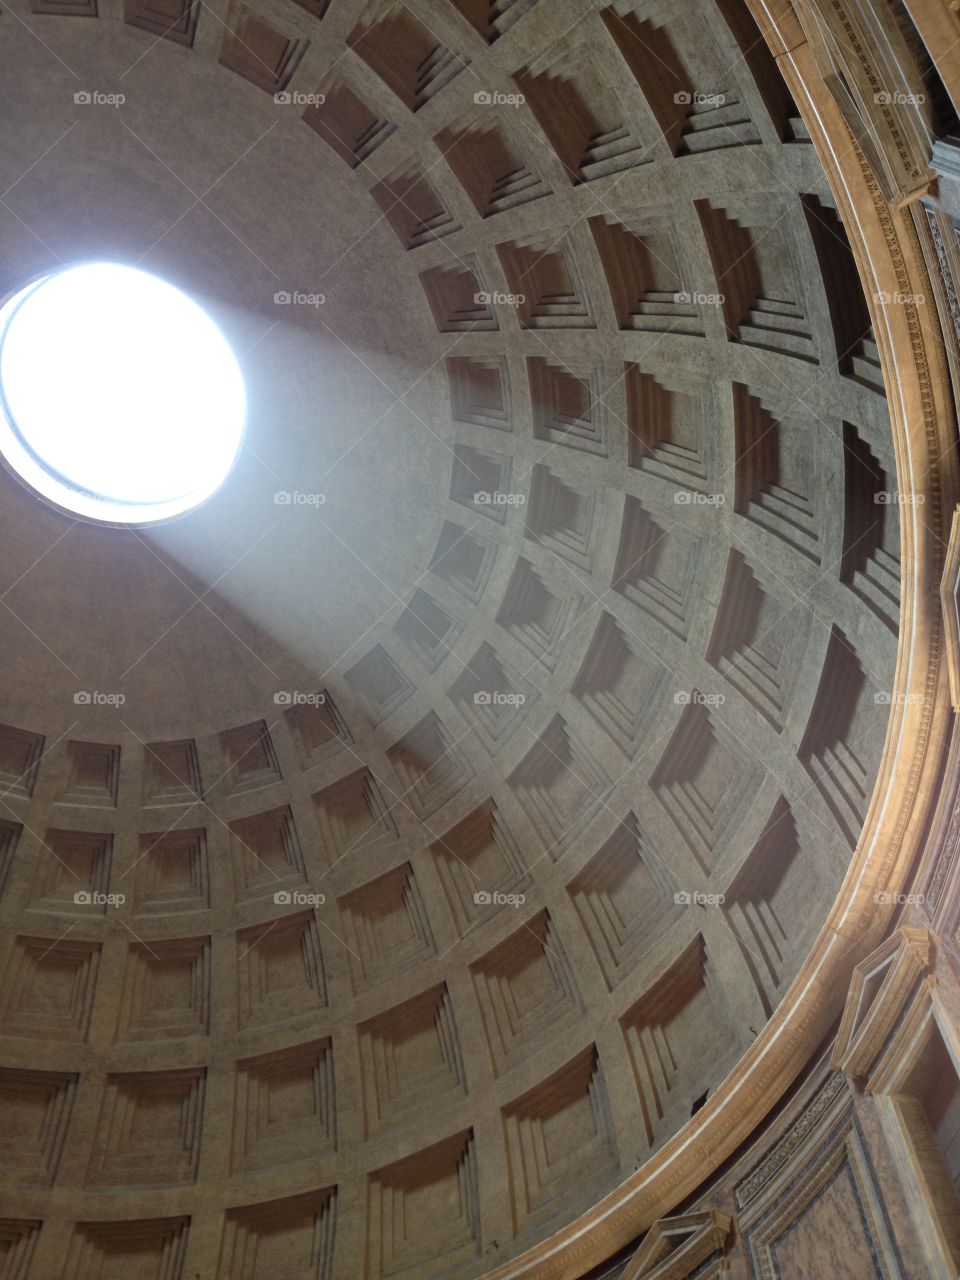 The ceiling of the pantheon in Rome, italy